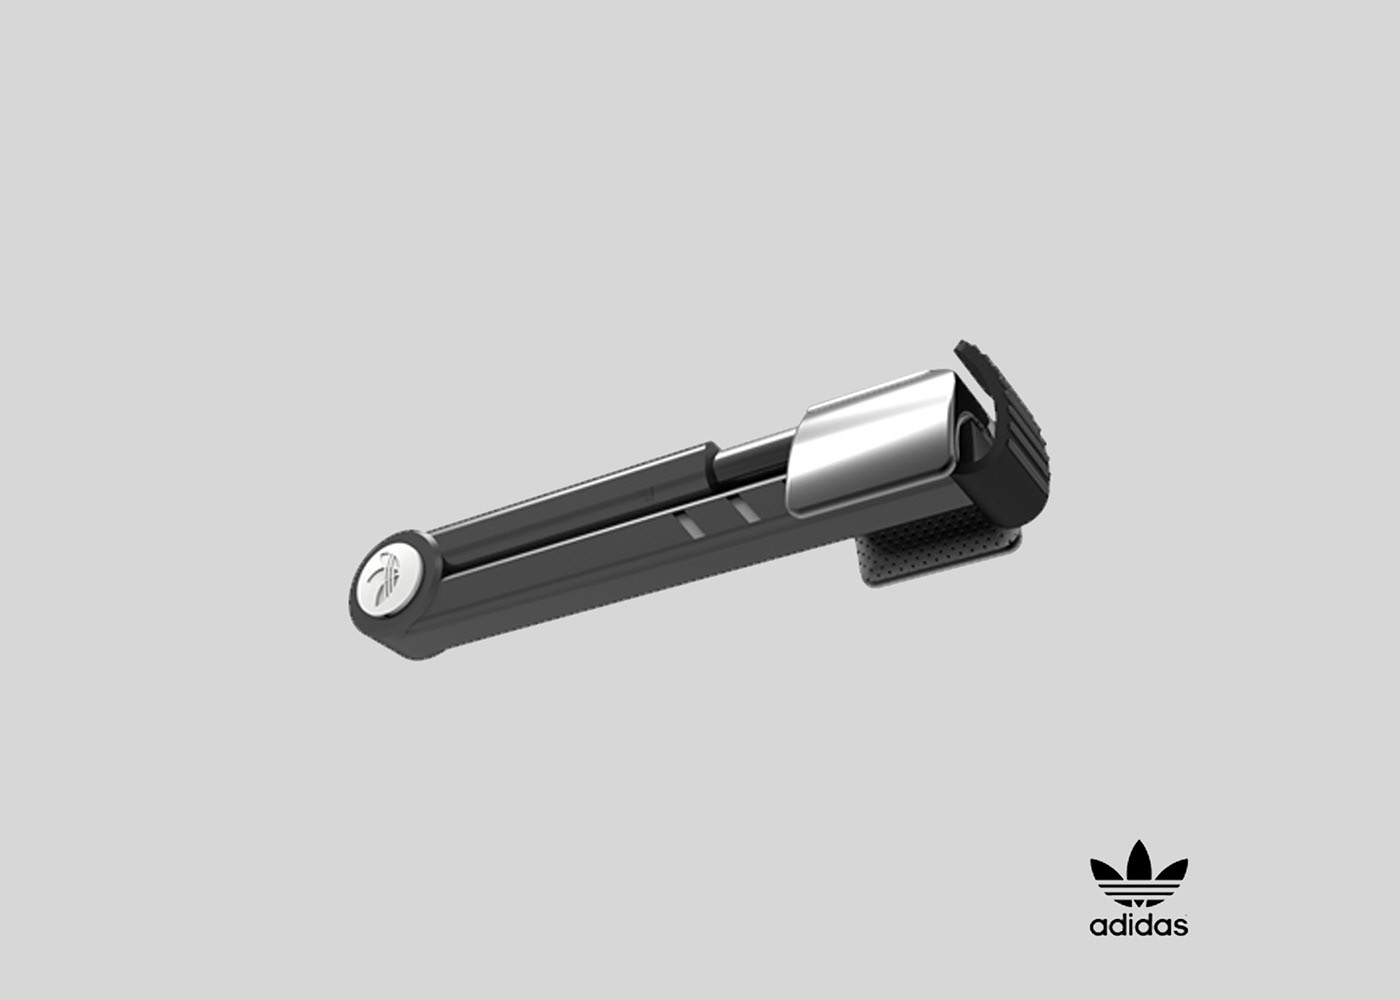 3D model adidas crutches disability industrial design  product design  Rhino Solidworks sports